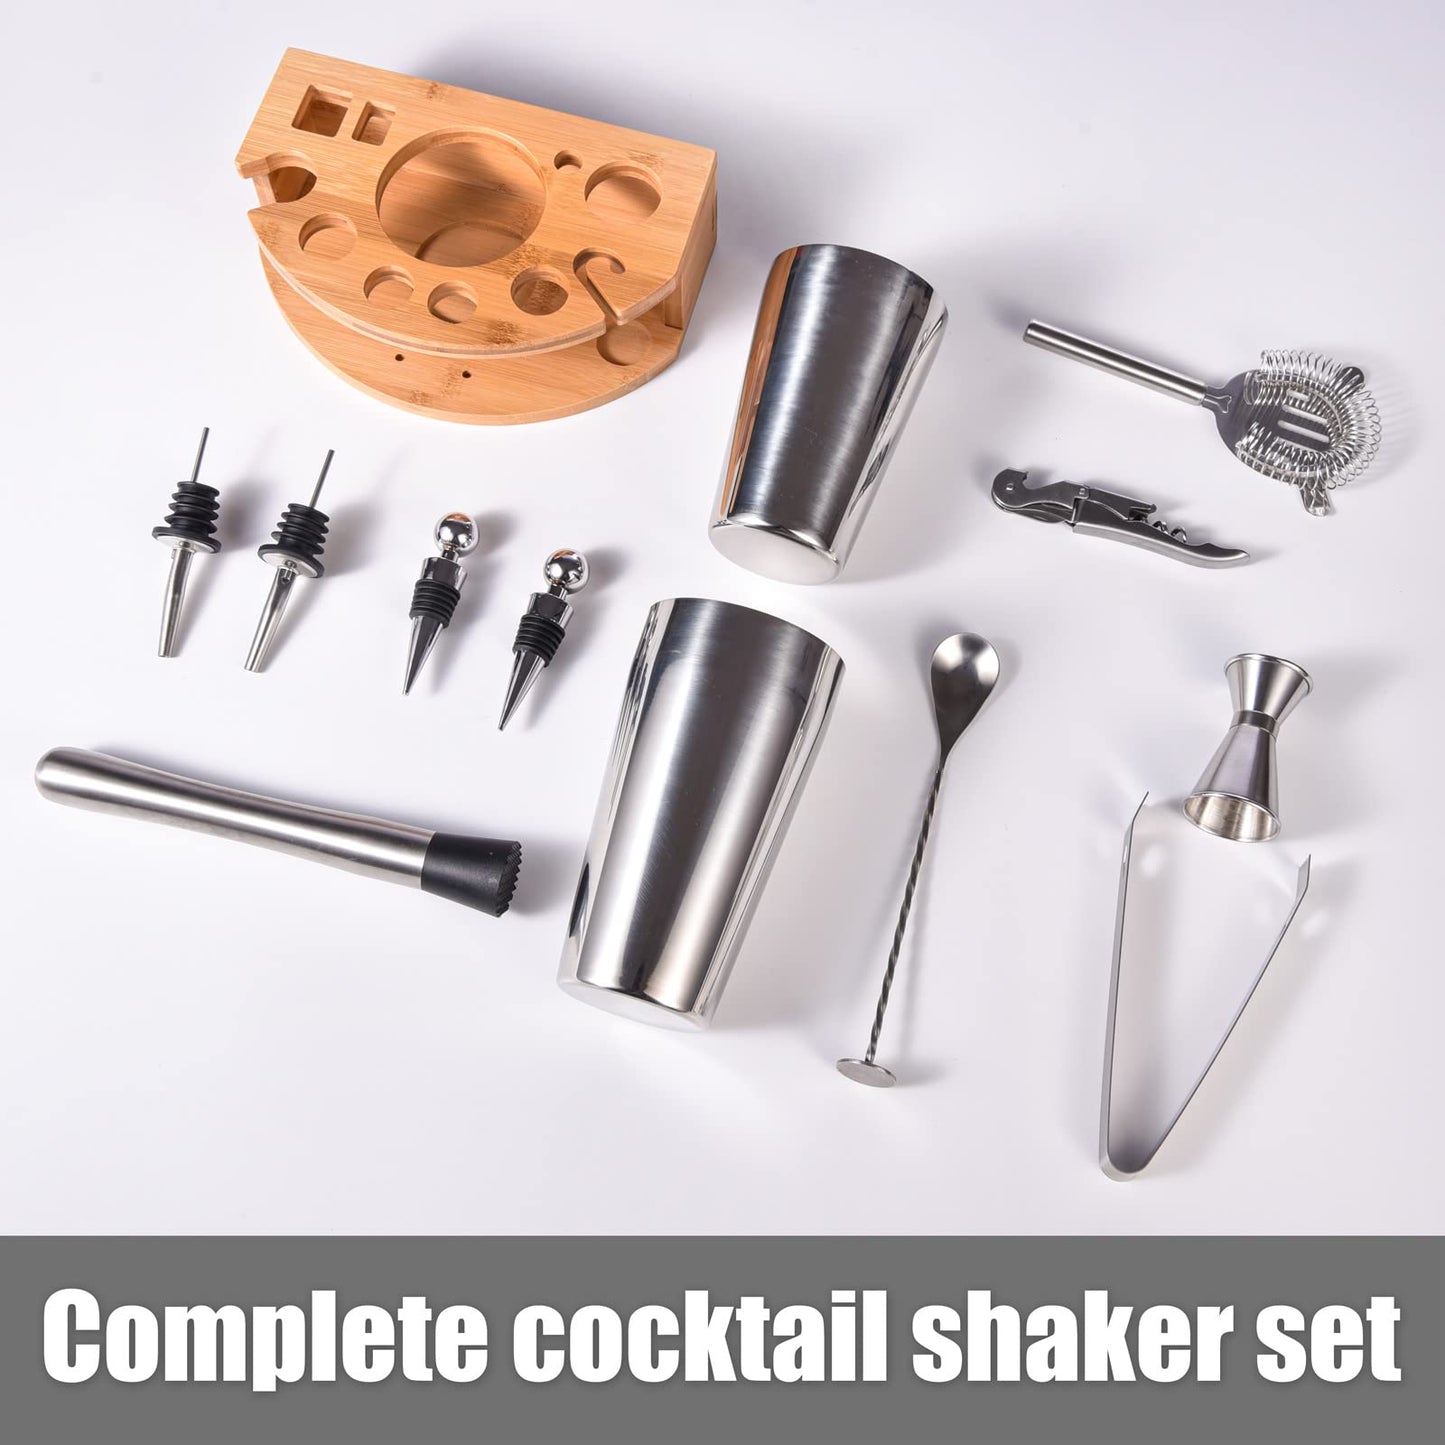 Esmula Bartender Kit with Stylish Bamboo Stand, 12 Piece 20oz/25oz Boston Cocktail Shaker Set for Mixed Drink, Professional Stainless Steel Bar Tool Set, Gift for Man Dad- Cocktail Recipes Booklet